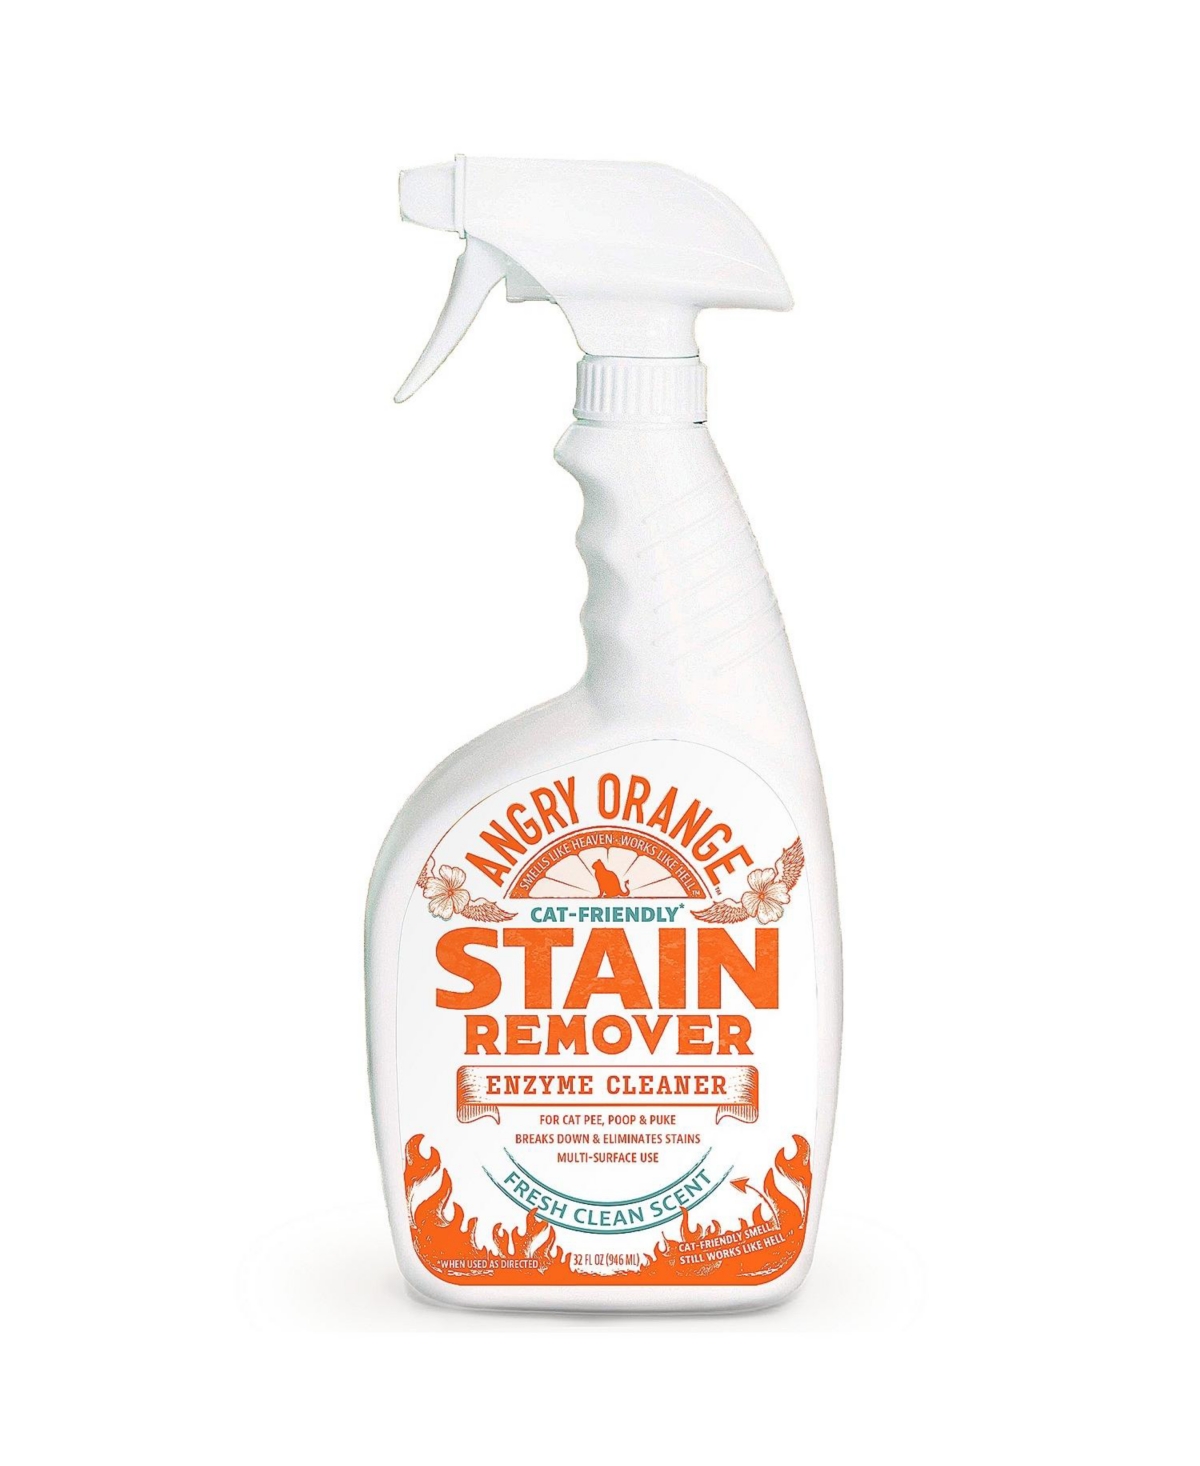 Bio-Enzyme Pet Stain and Odor Eliminator (32 oz) - Fresh Clean